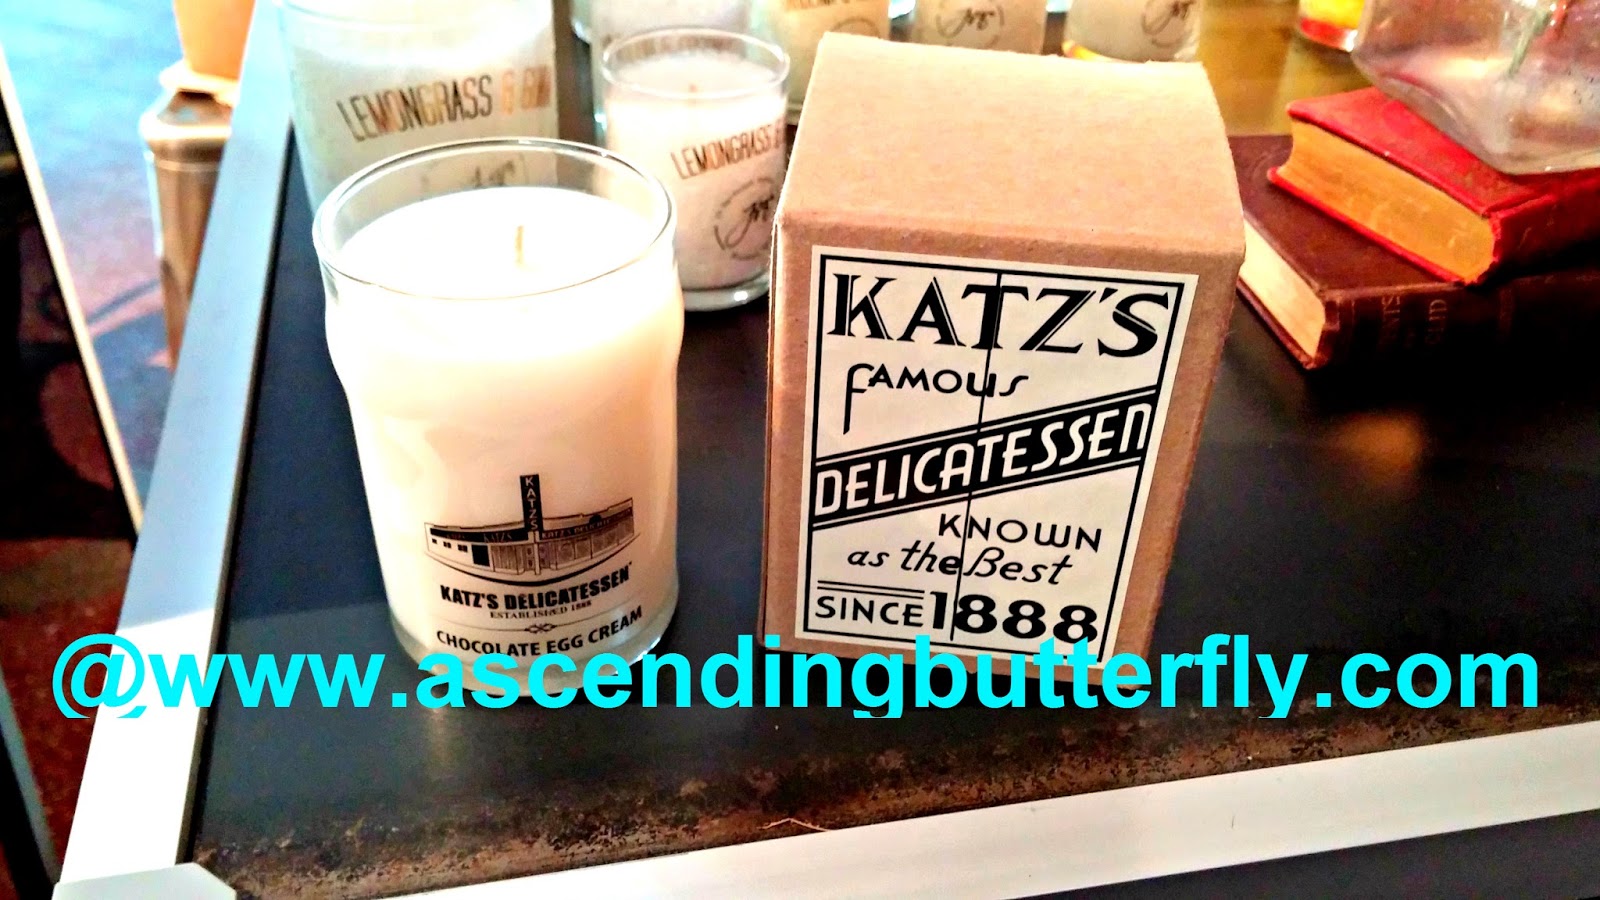 candle in honor of the Famous Katz's Delicatessen, a NYC institution since 1888